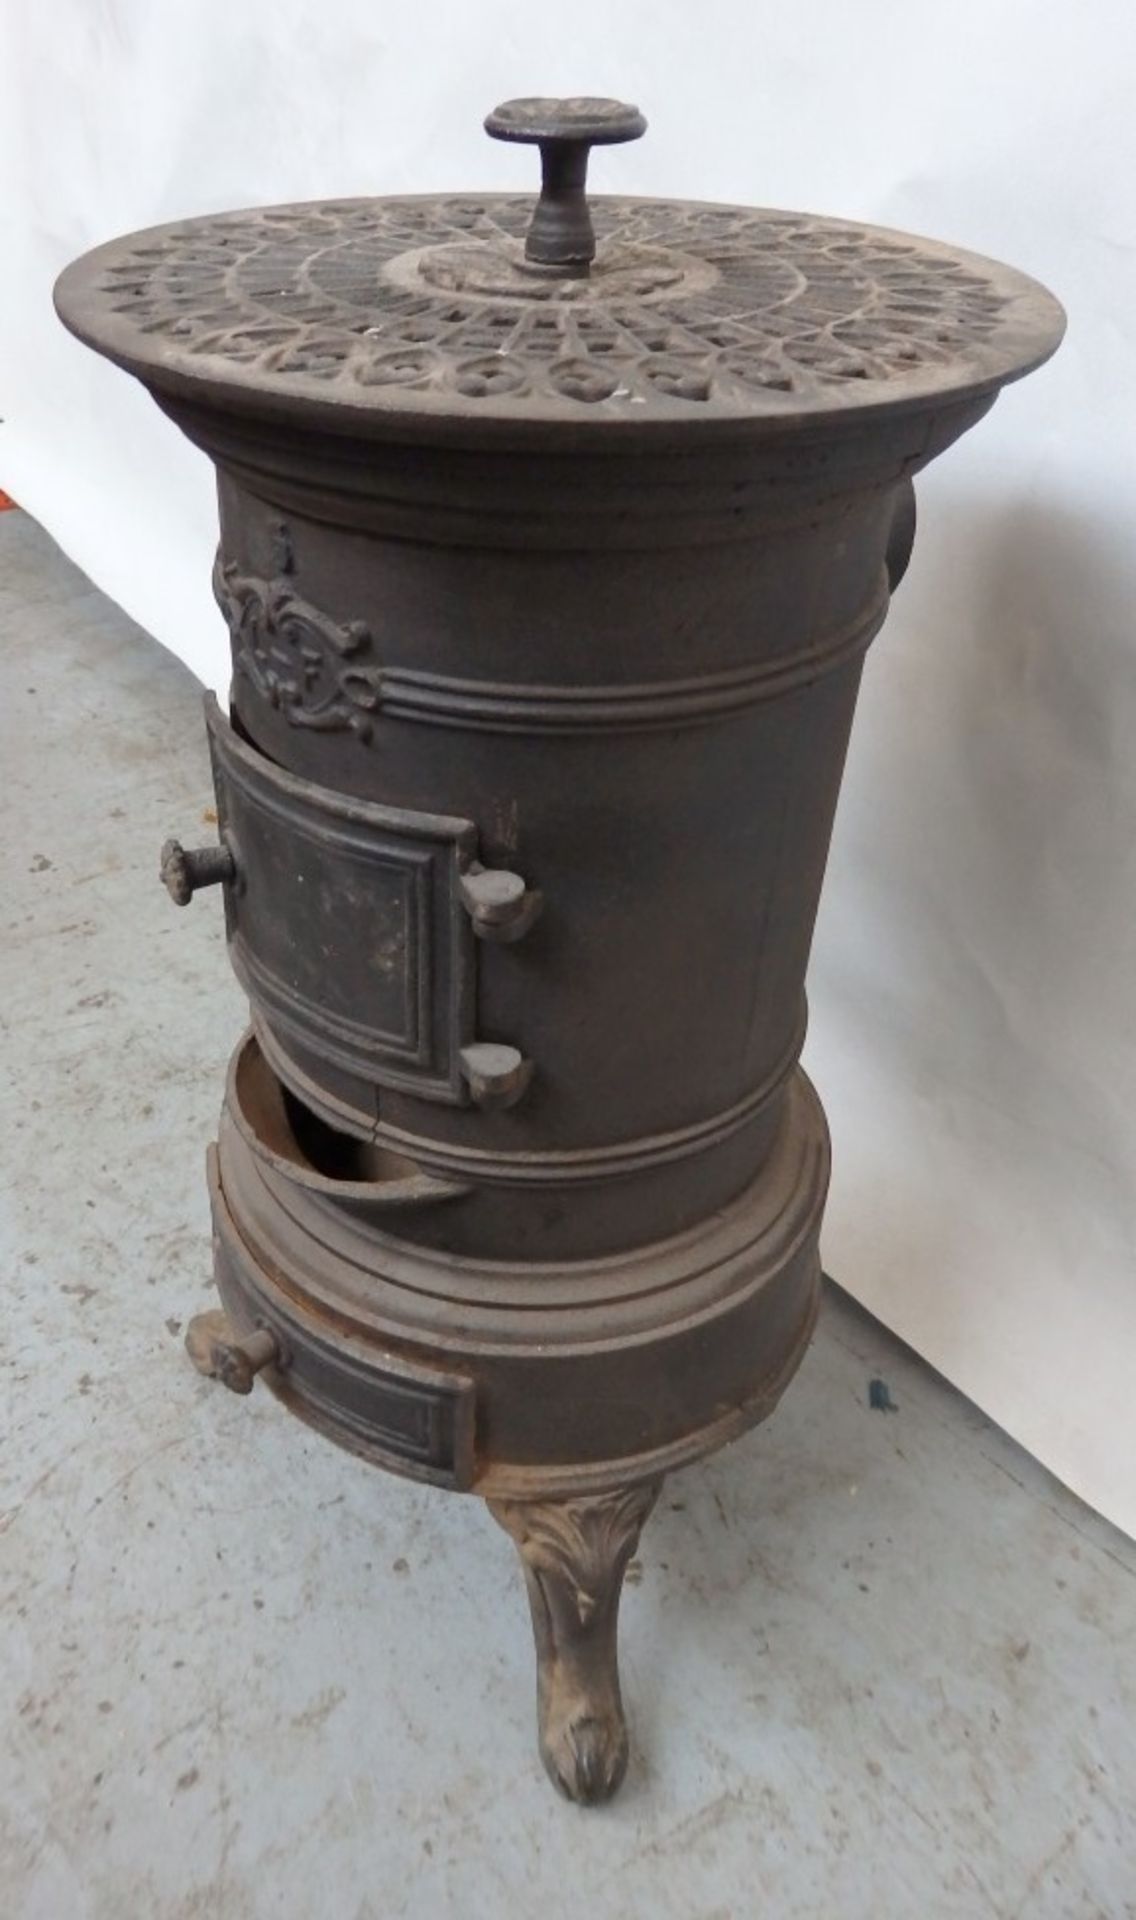 1 x Reclaimed Antique Cast Iron Potbelly Wood Burner / Stove - Dimensions: H61, Diameter 30cm - - Image 3 of 9